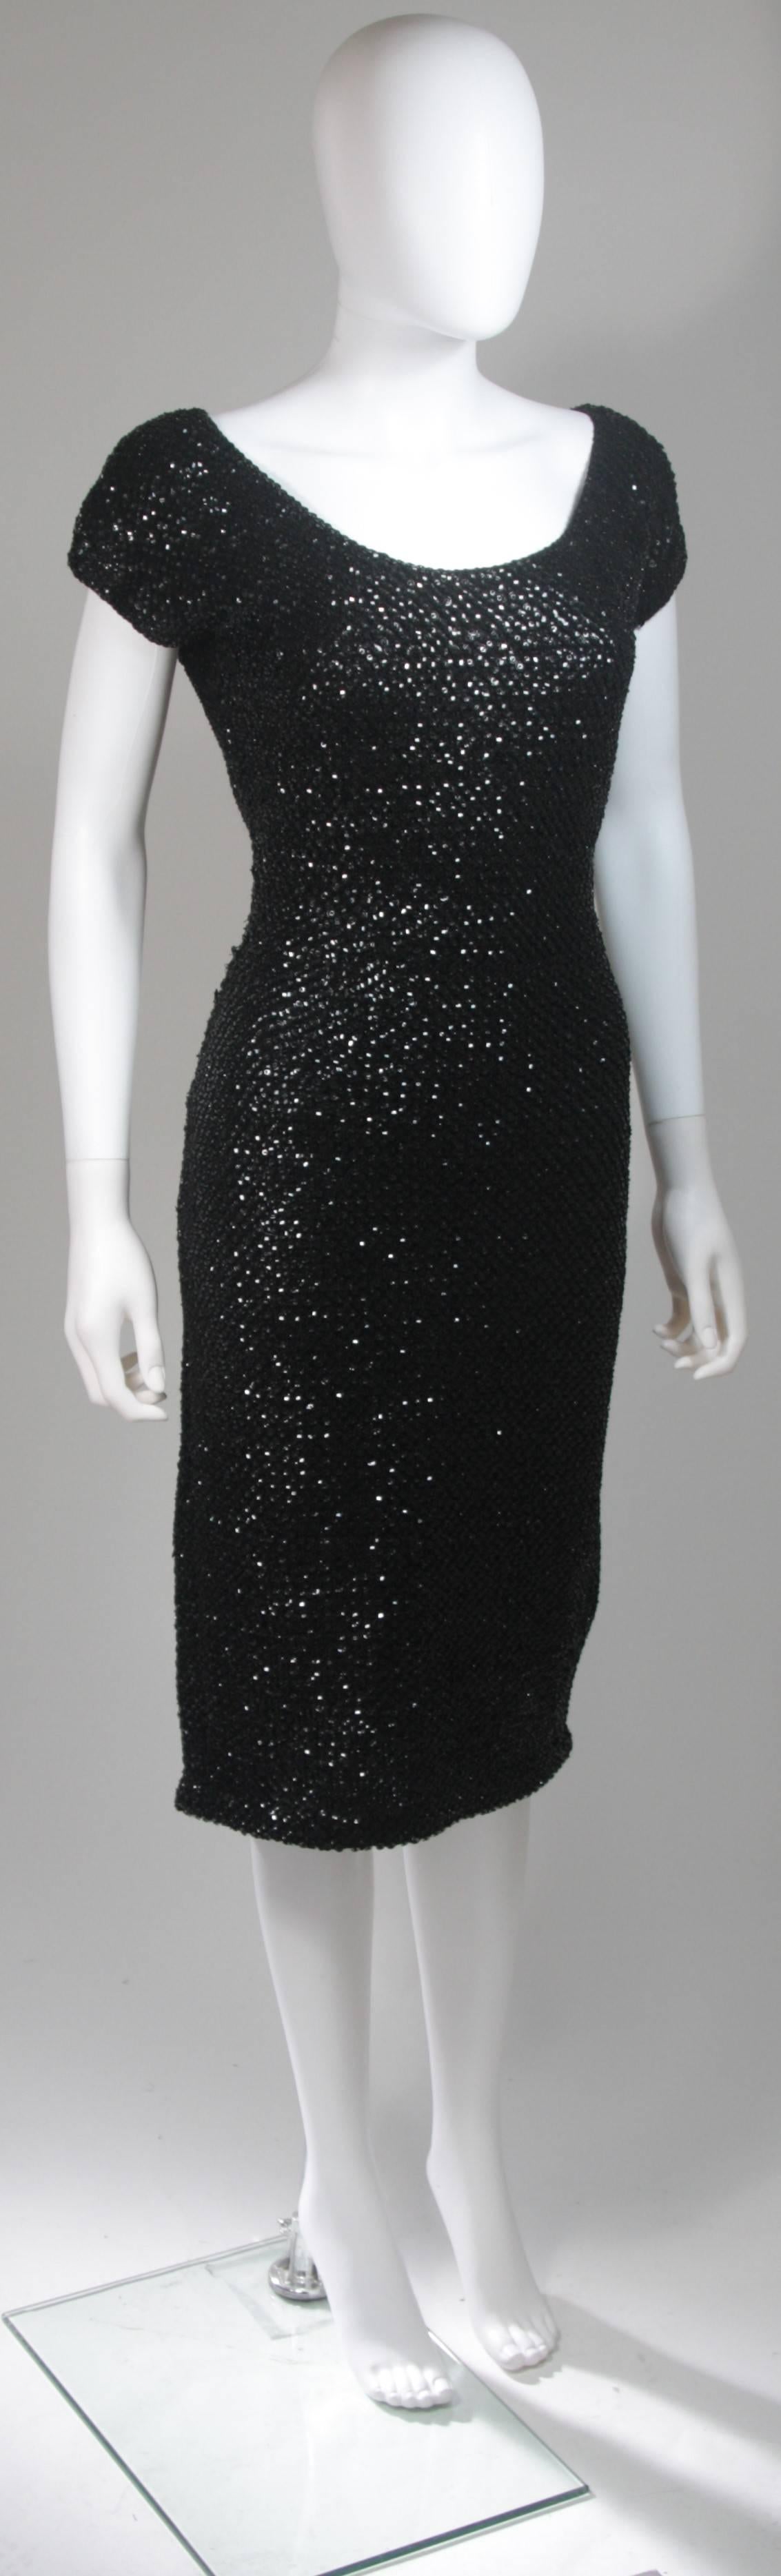 Gene Shelly Black Knit Wool Cocktail Dress with Sequin Embellishment  In Excellent Condition For Sale In Los Angeles, CA